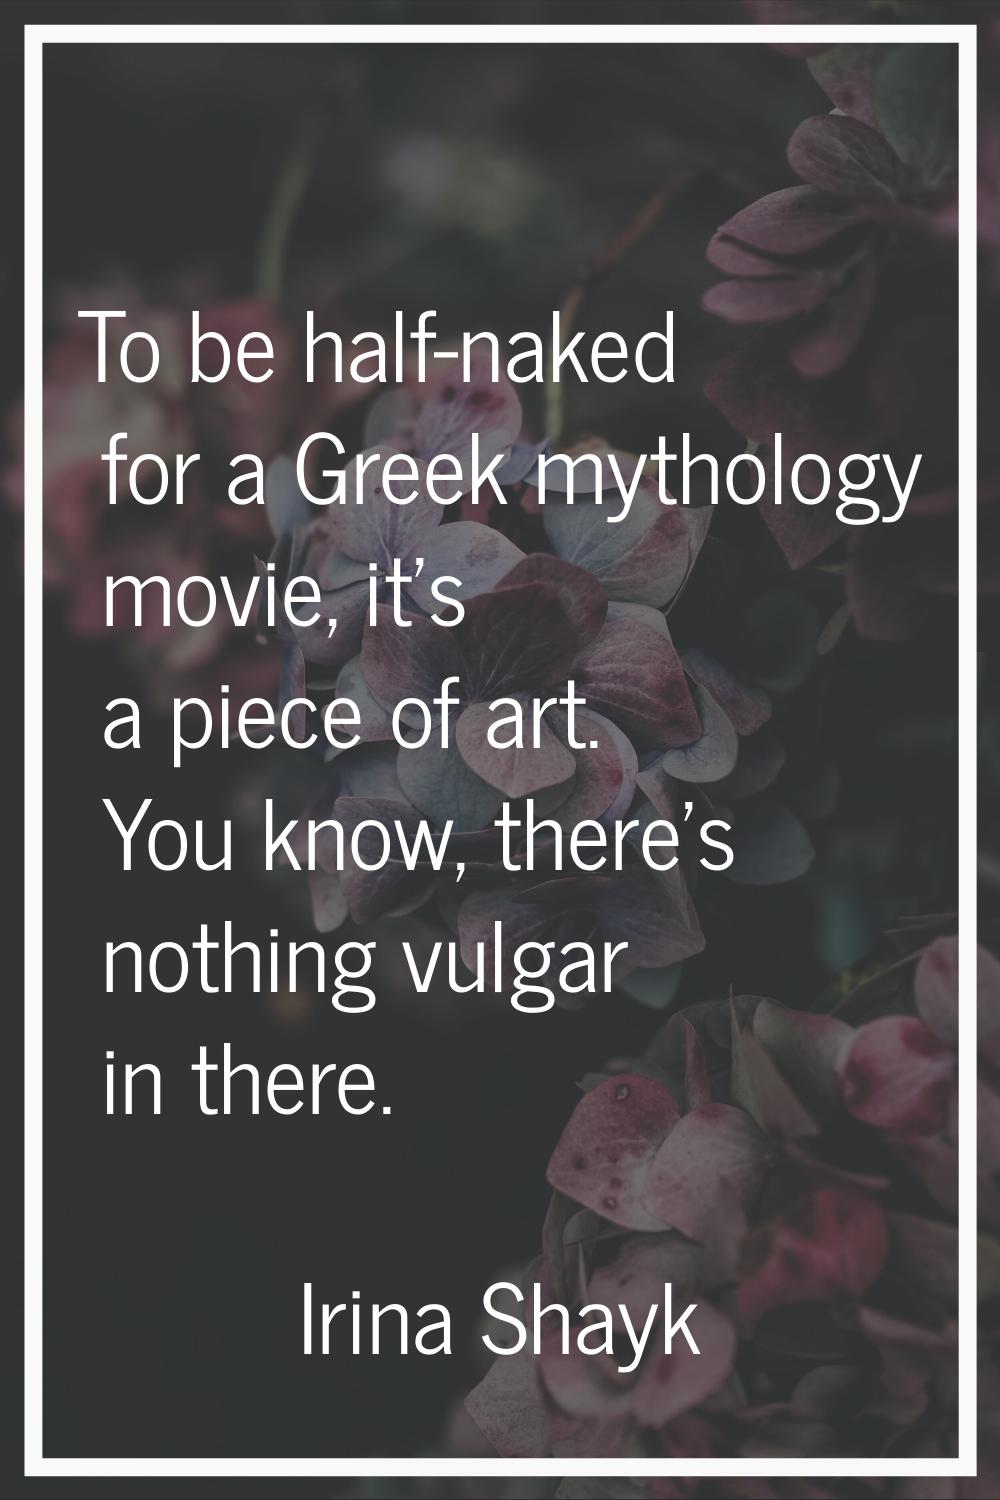 To be half-naked for a Greek mythology movie, it's a piece of art. You know, there's nothing vulgar